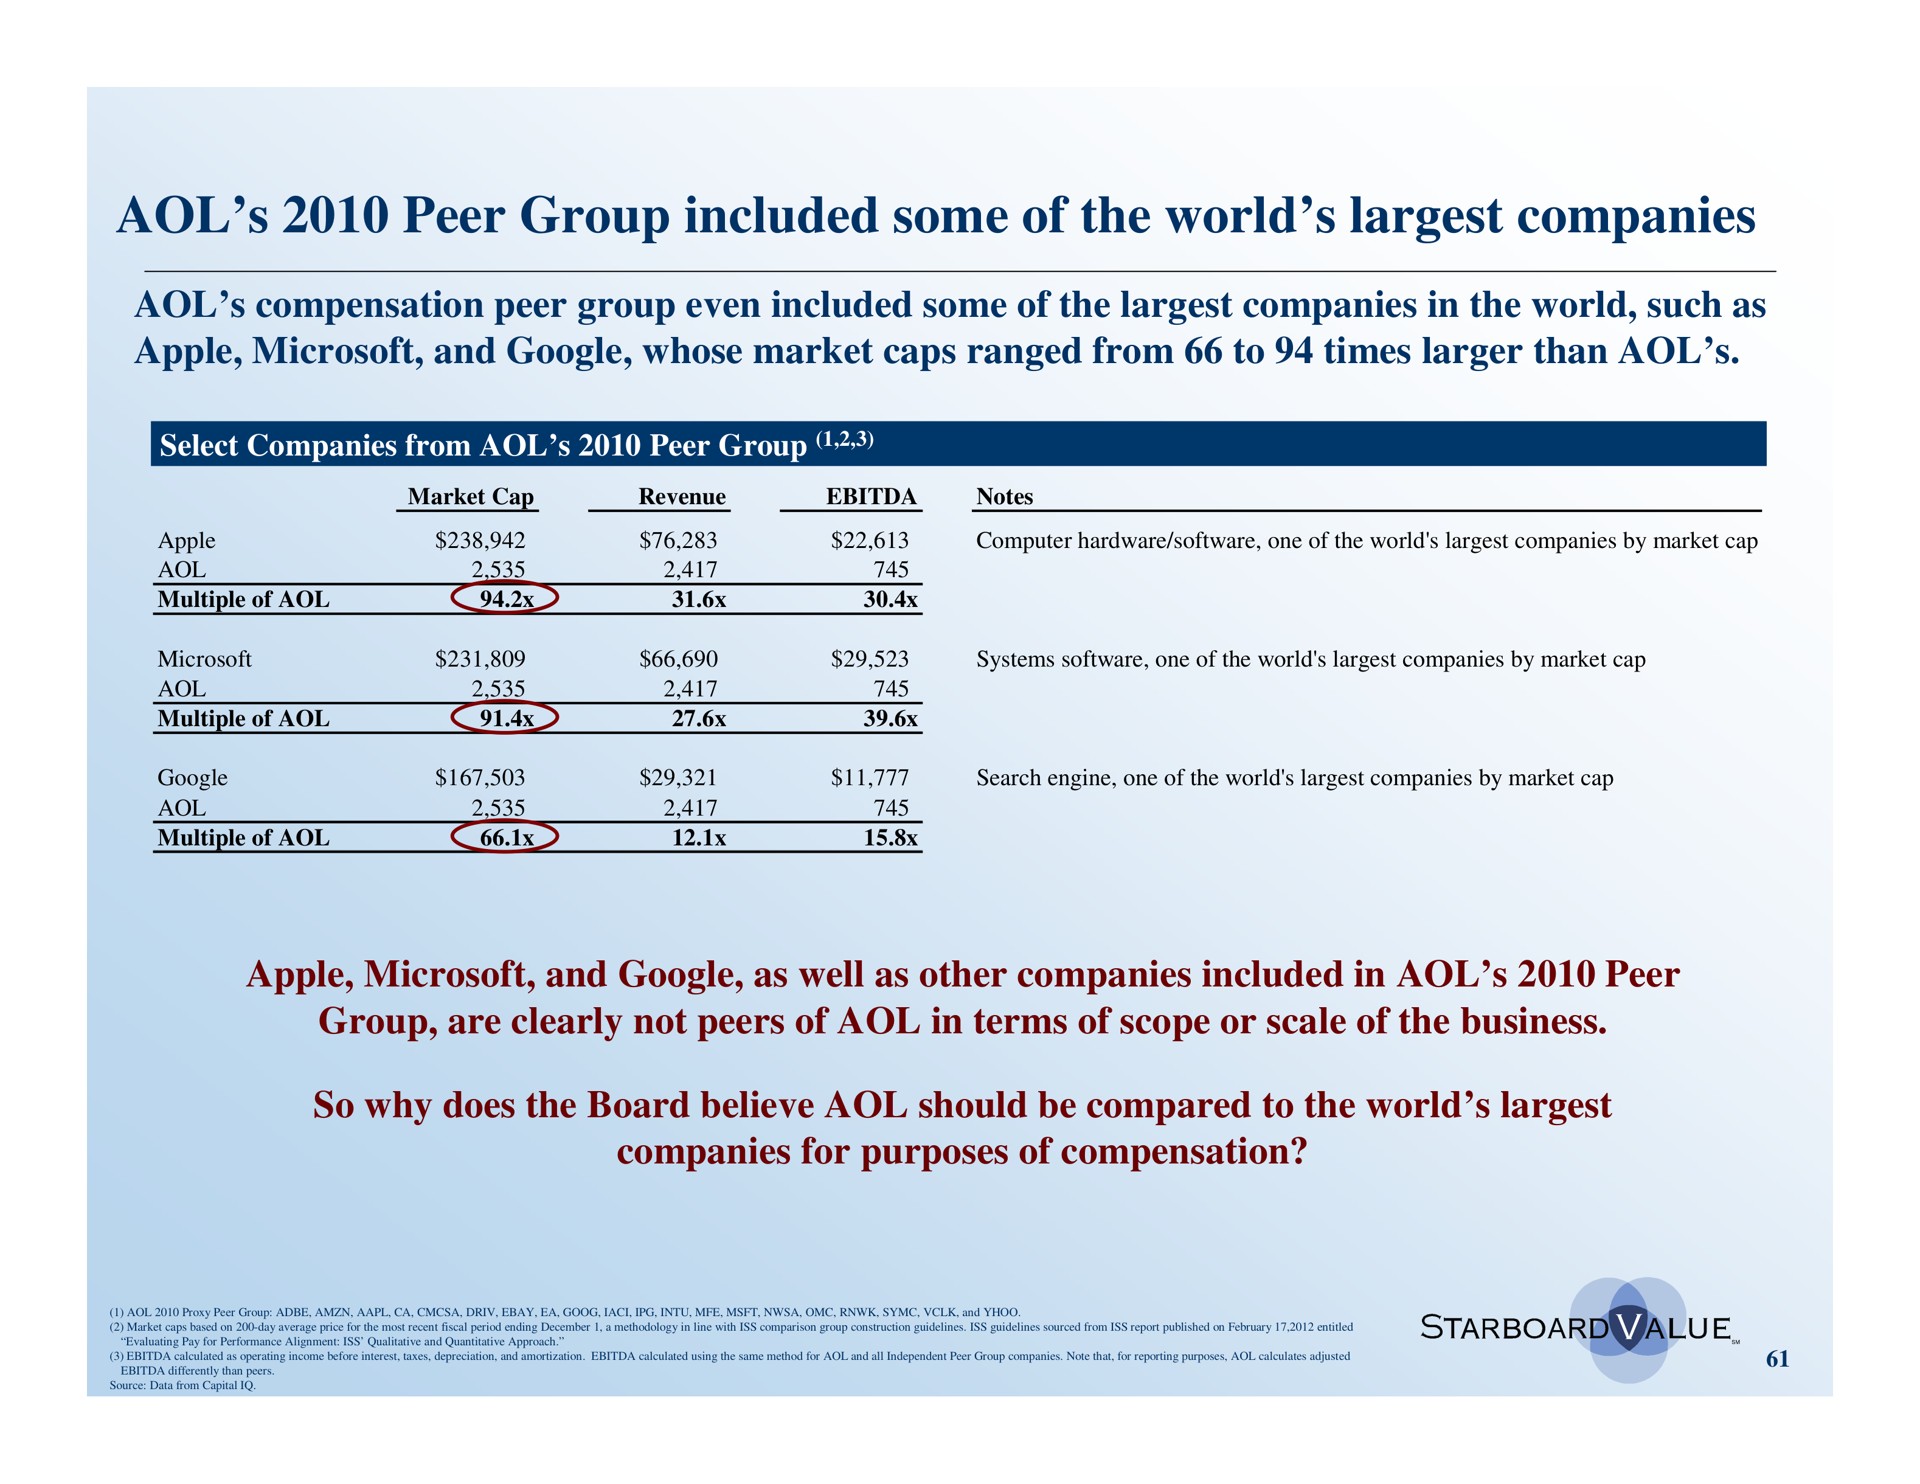 peer group included some of the world companies | Starboard Value